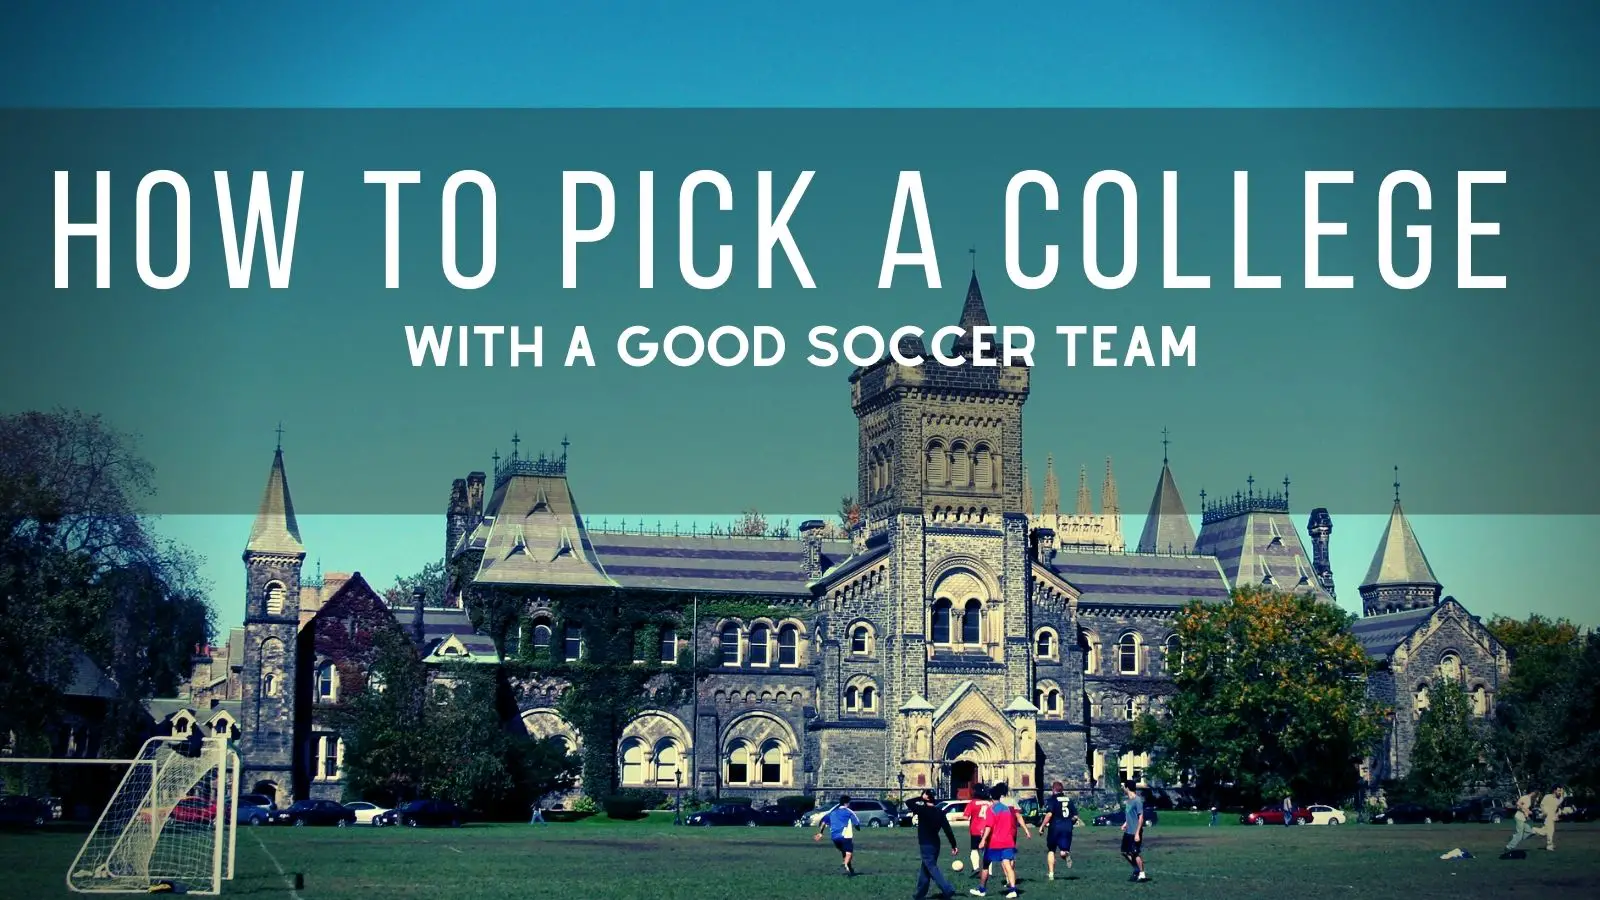 How to Pick a College with a Good Soccer Team